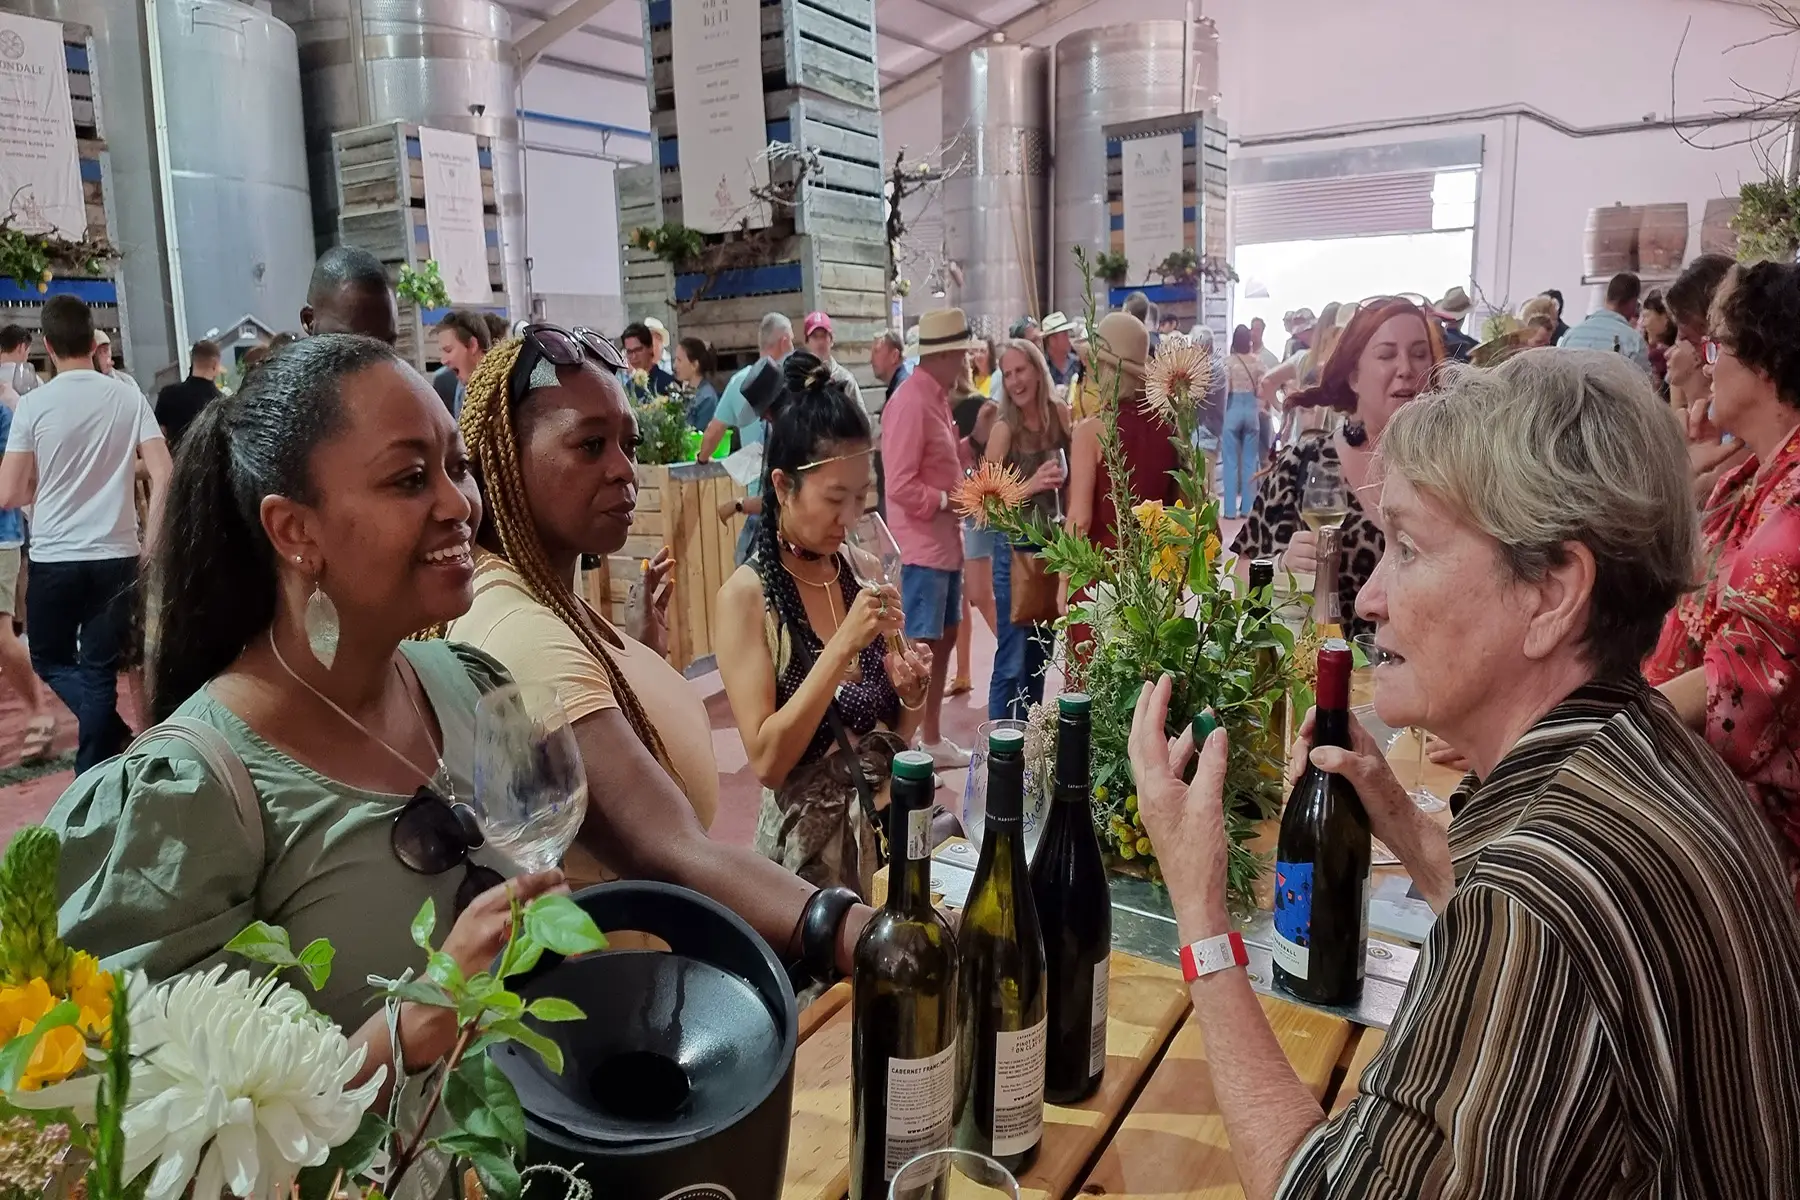 A diverse group of South Africans tasting wine at the South African Wine Festival neat Stellenbosch